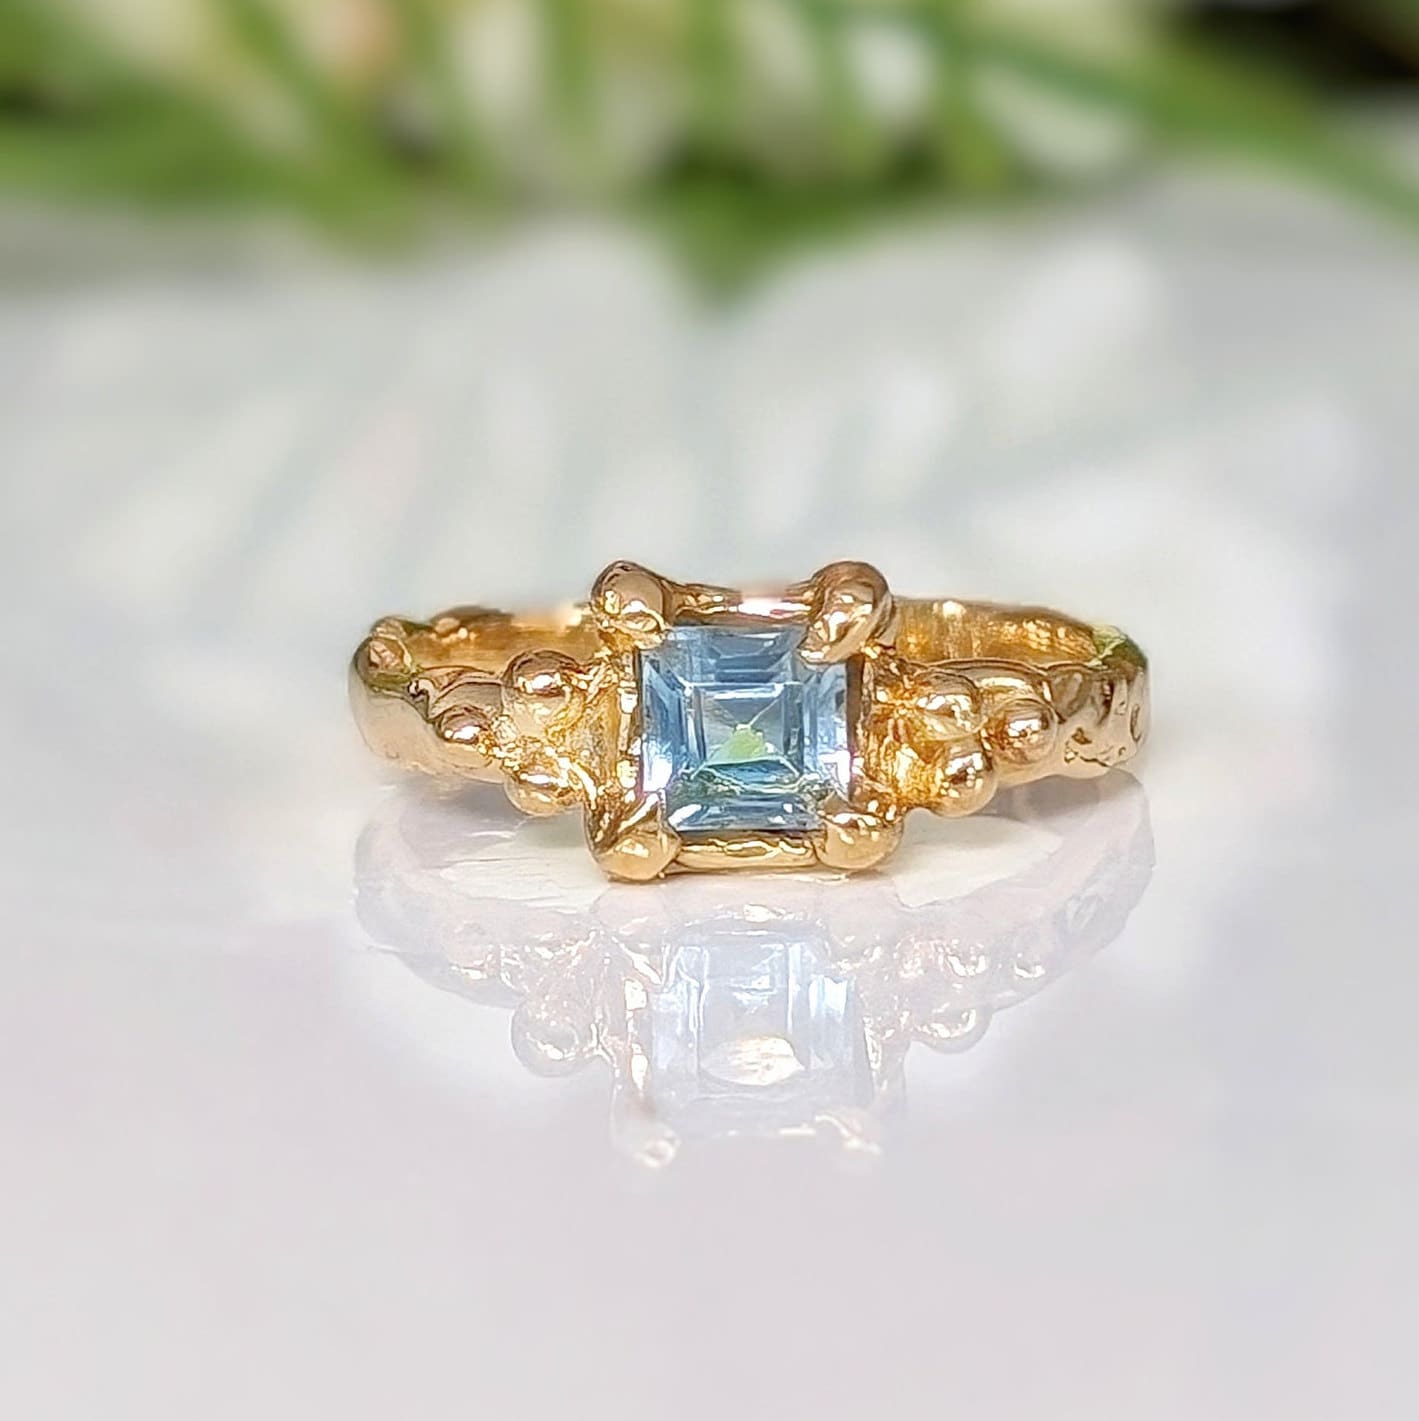 Square Blue Topaz set by prongs on a Solid 14k Gold Molten textured band